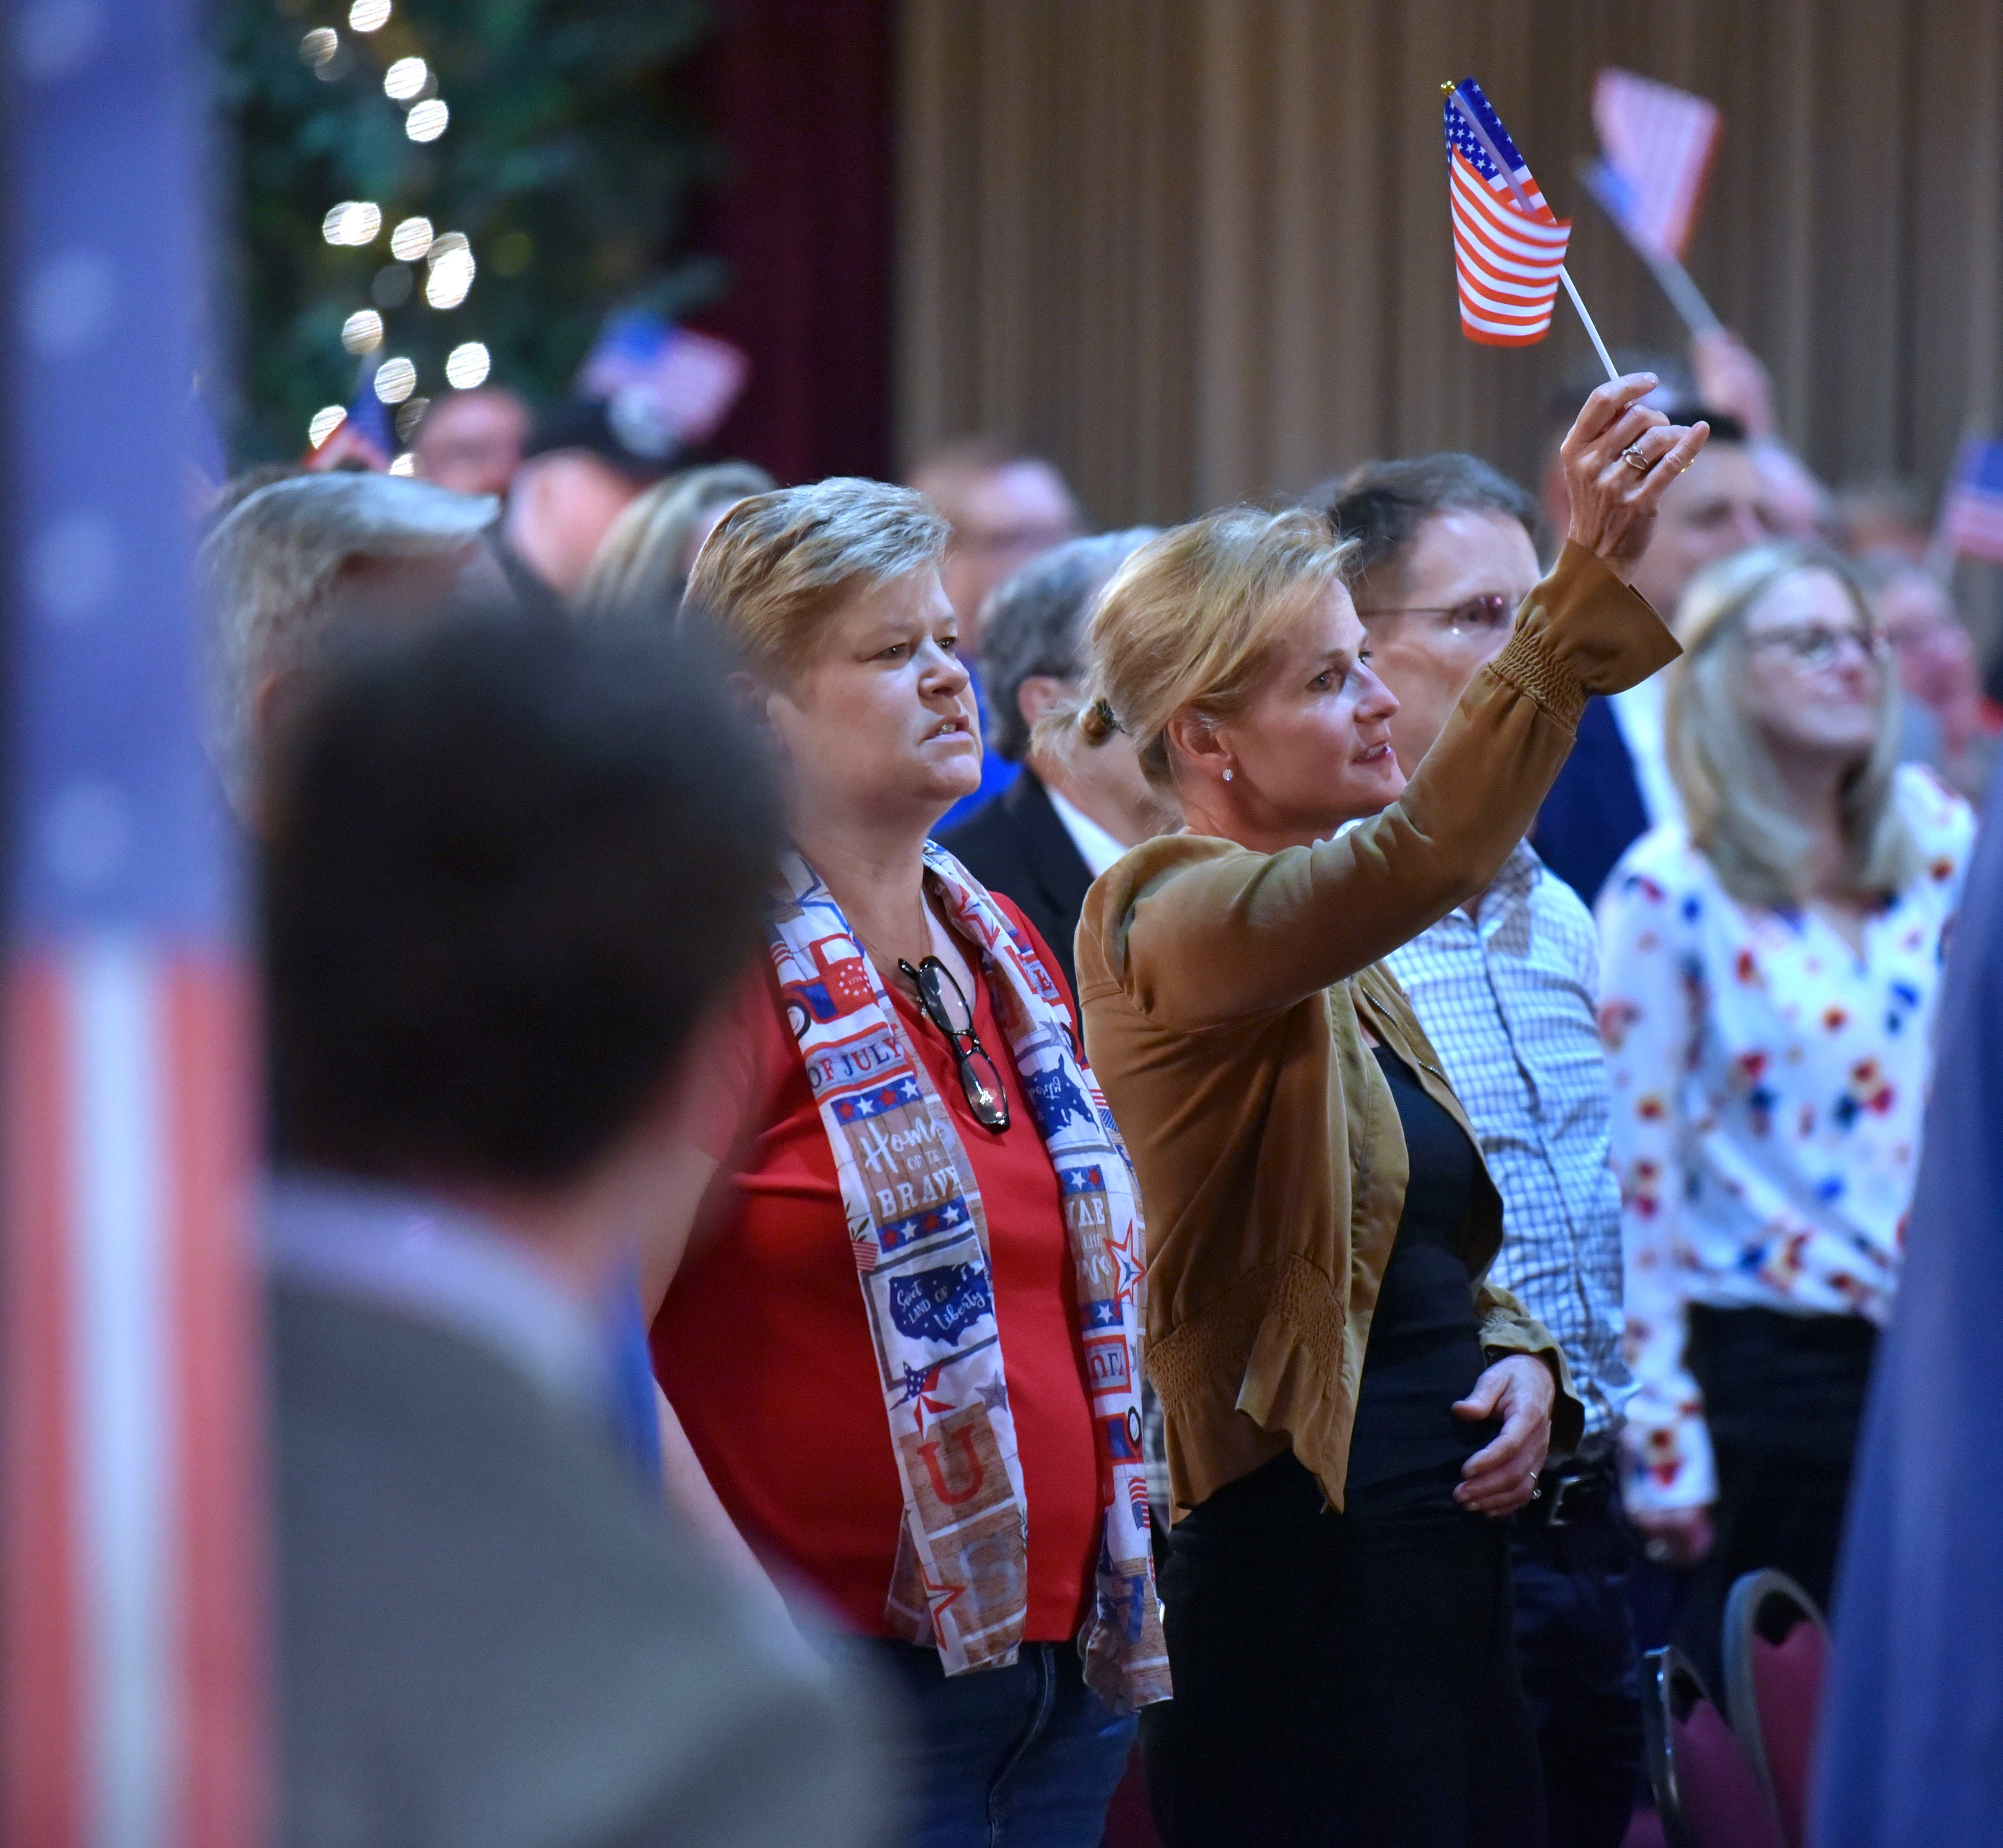 Monica Schafer, of Williamston, and others wave flags before the debate, Thursday night, May 12, 2022.